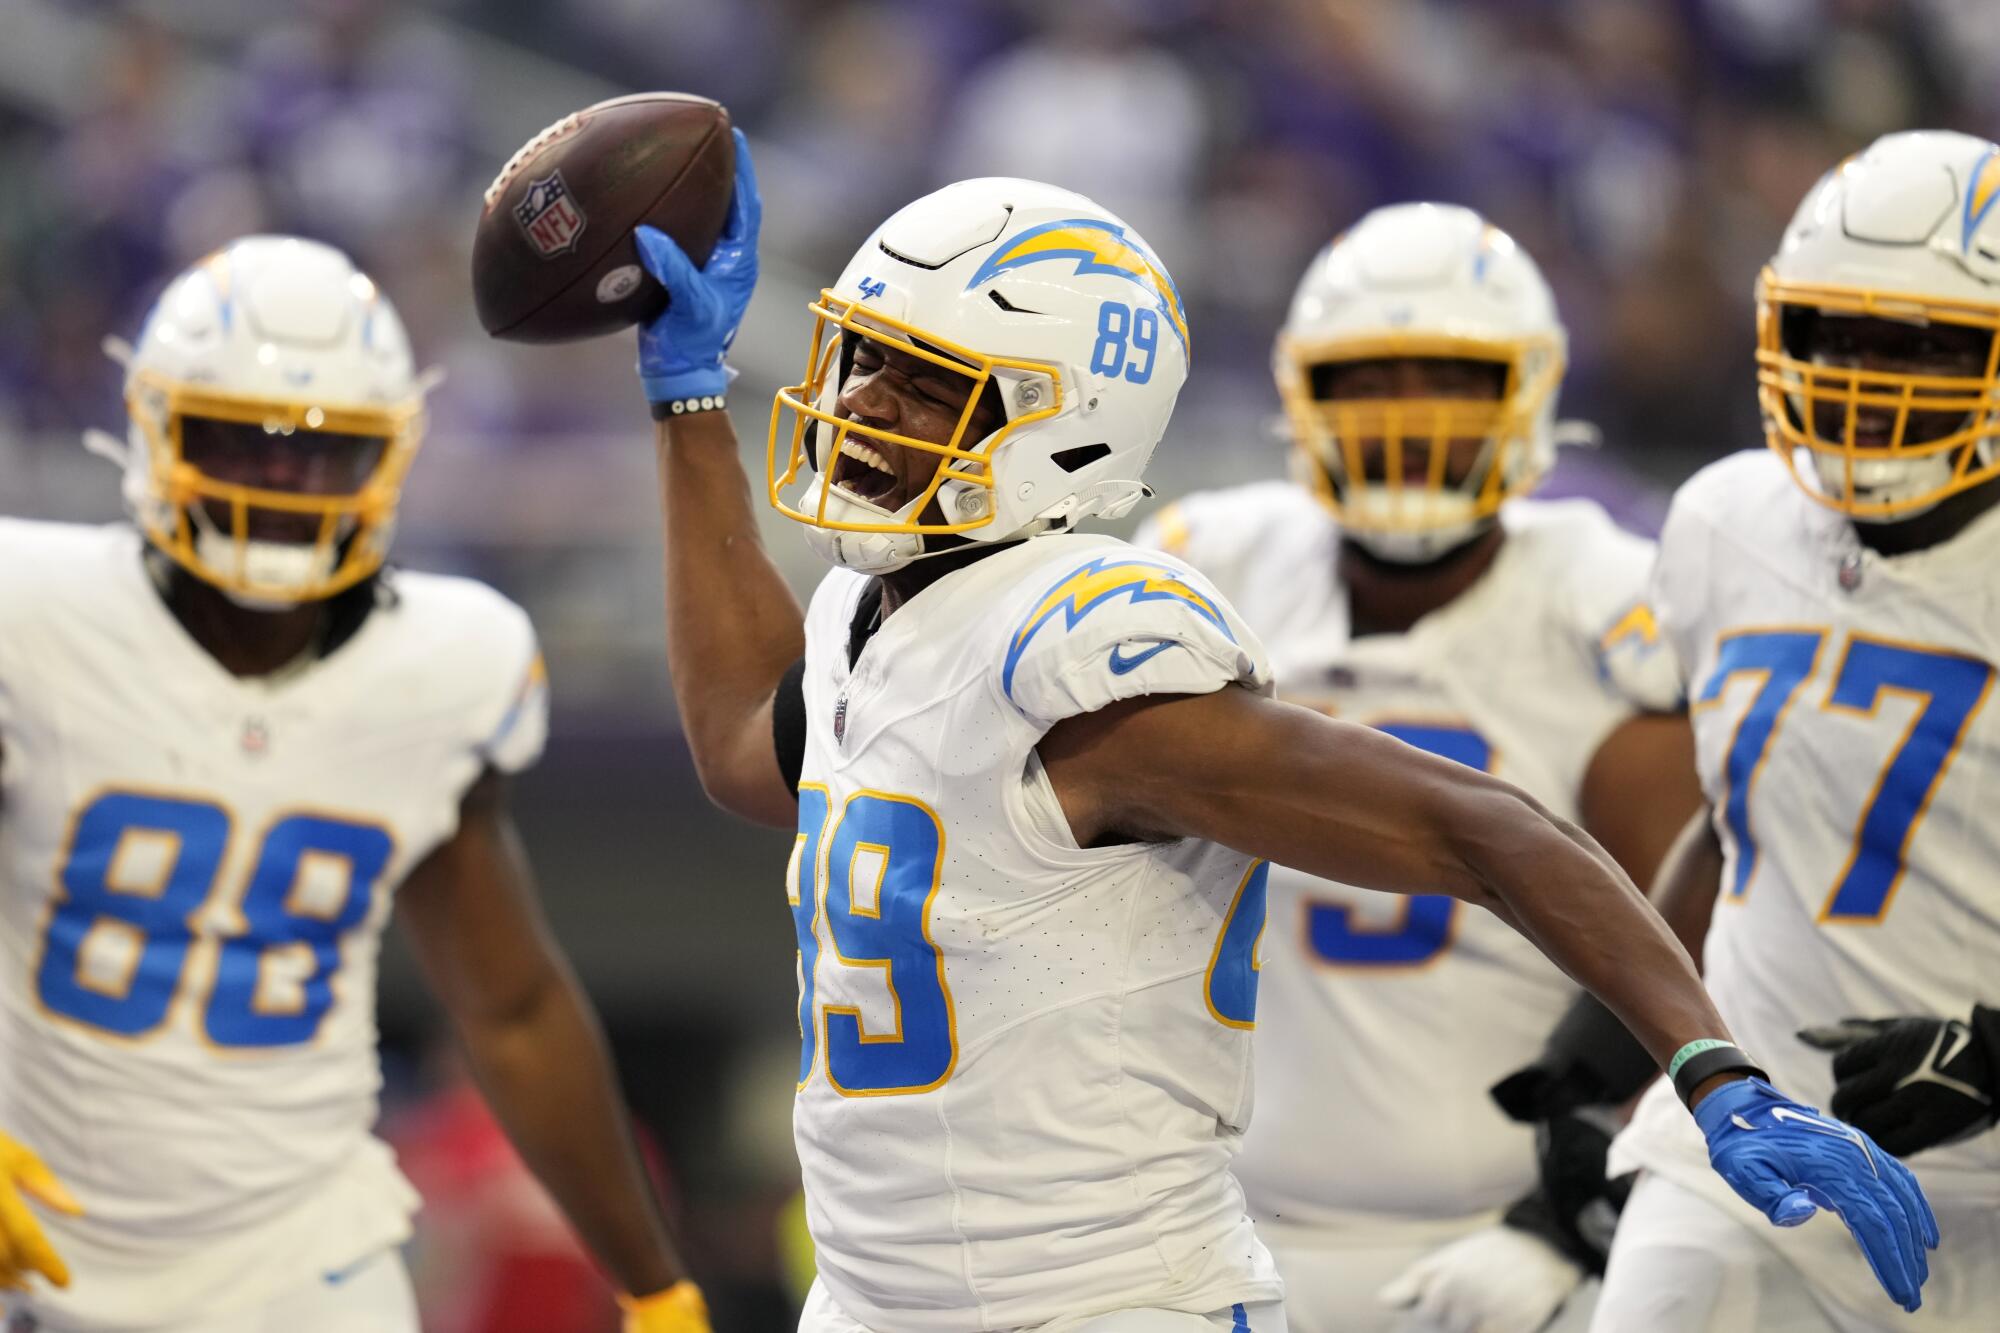 Chargers tight end Donald Parham Jr. celebrates after catching a touchdown pass against the Minnesota Vikings.